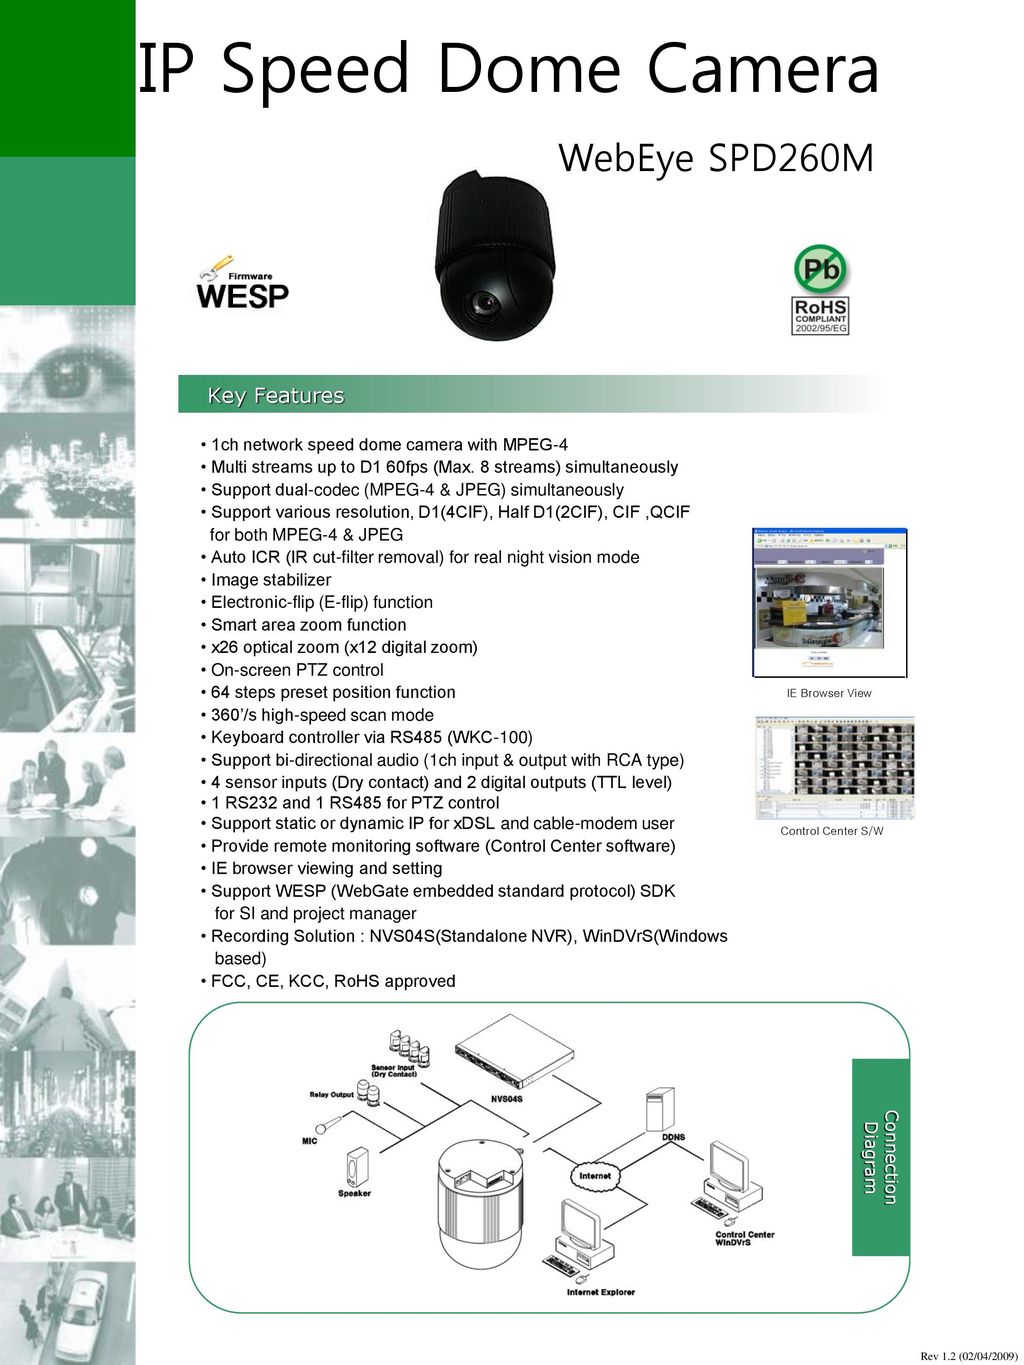 IP Speed Dome Camera WebEye SPD260M 24 Key Features